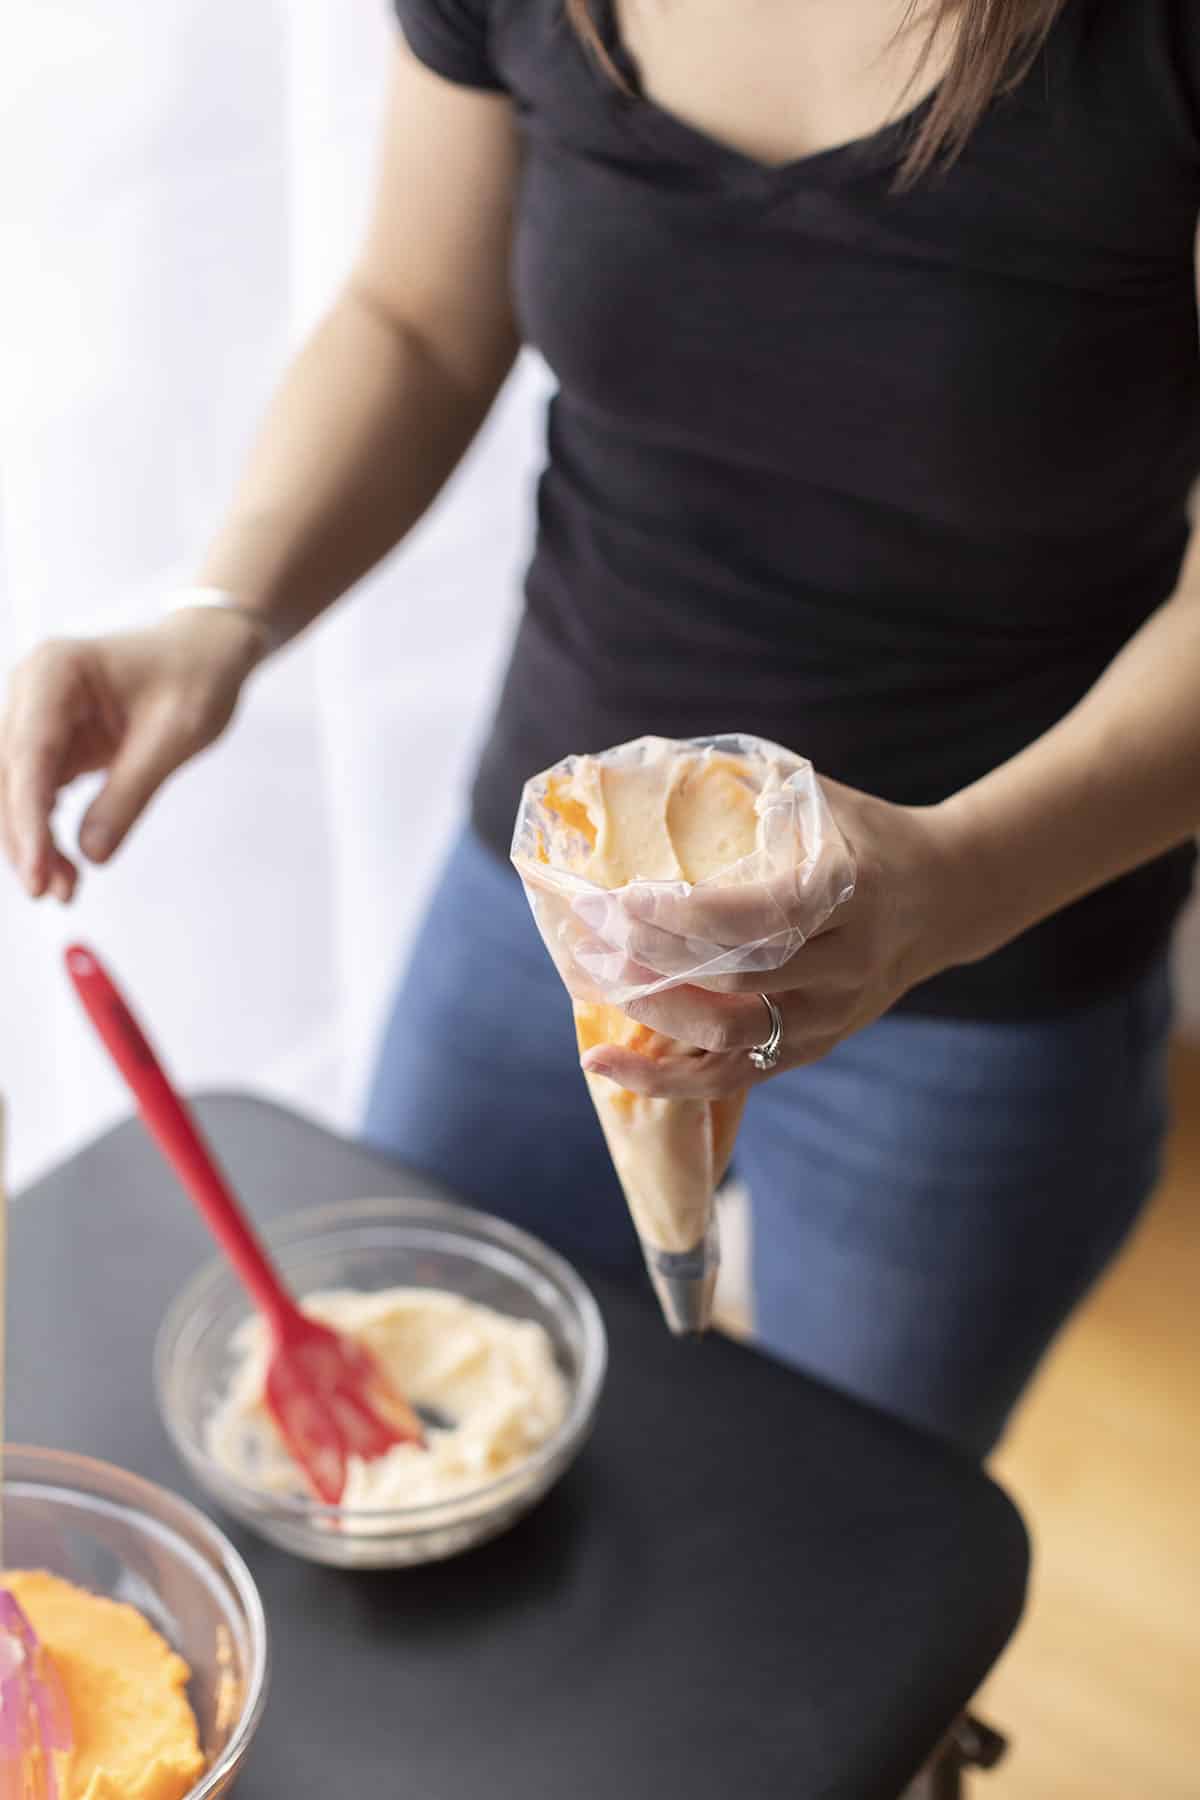 woman holding a piping bag and filling it with orange creamsicle frosting